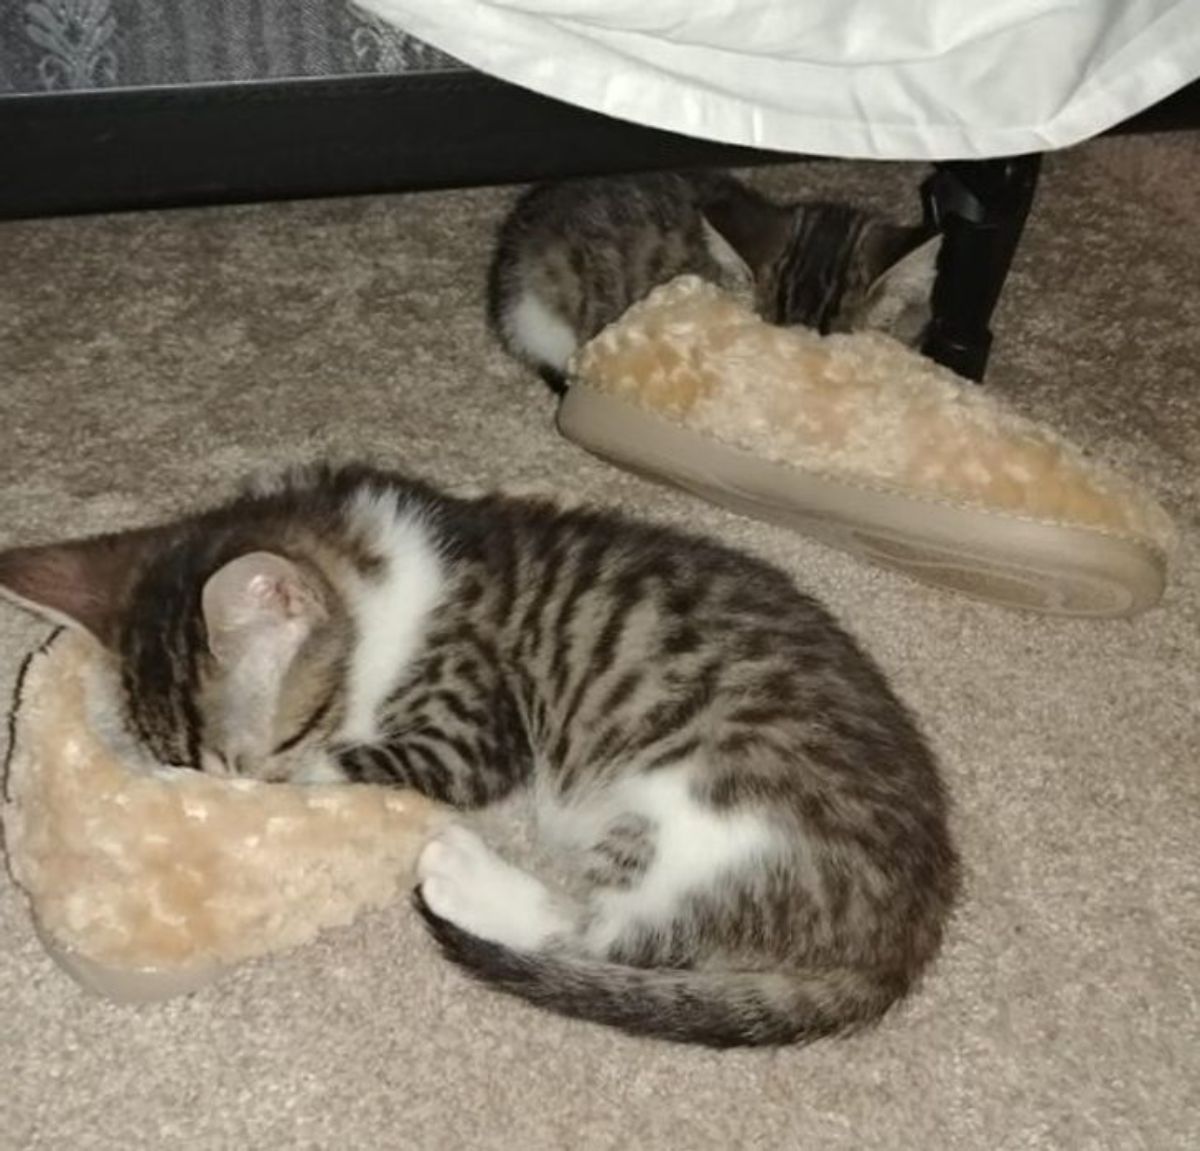 2 white and brown tabby kittens sleeping on the floor with their faces inside a brown fuzzy slipper